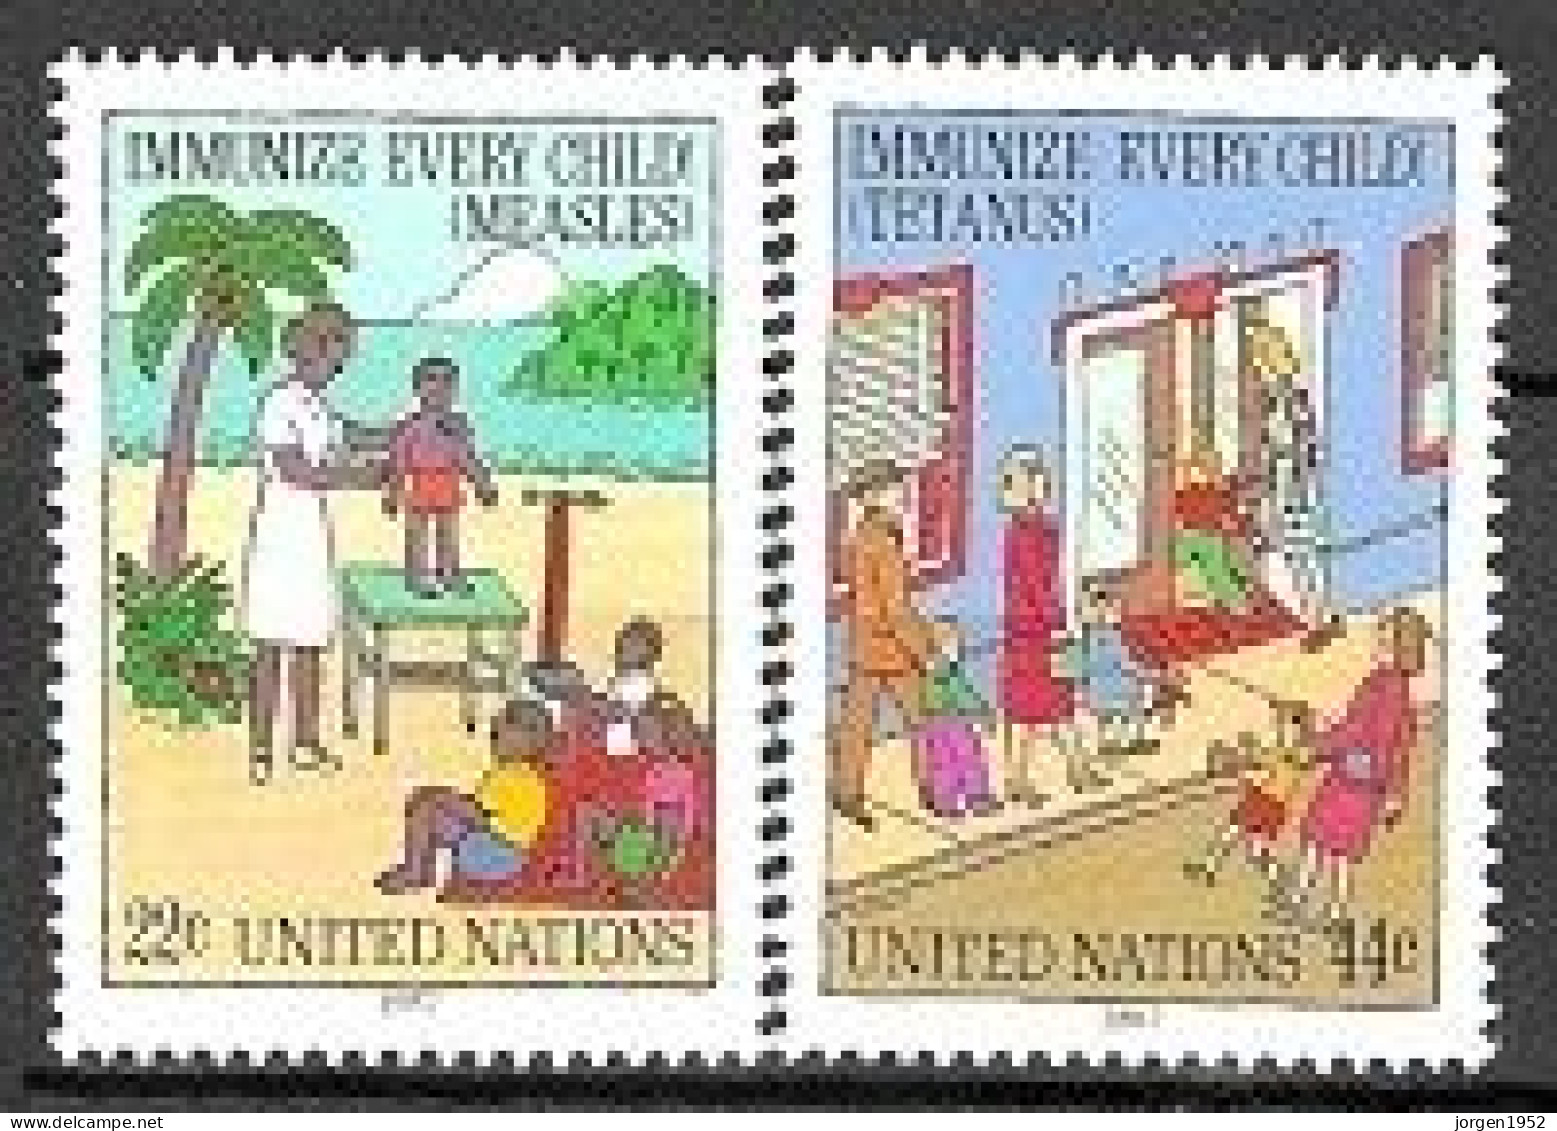 UNITED NATIONS # NEW YORK FROM 1987 STAMPWORLD 542-43** - Neufs